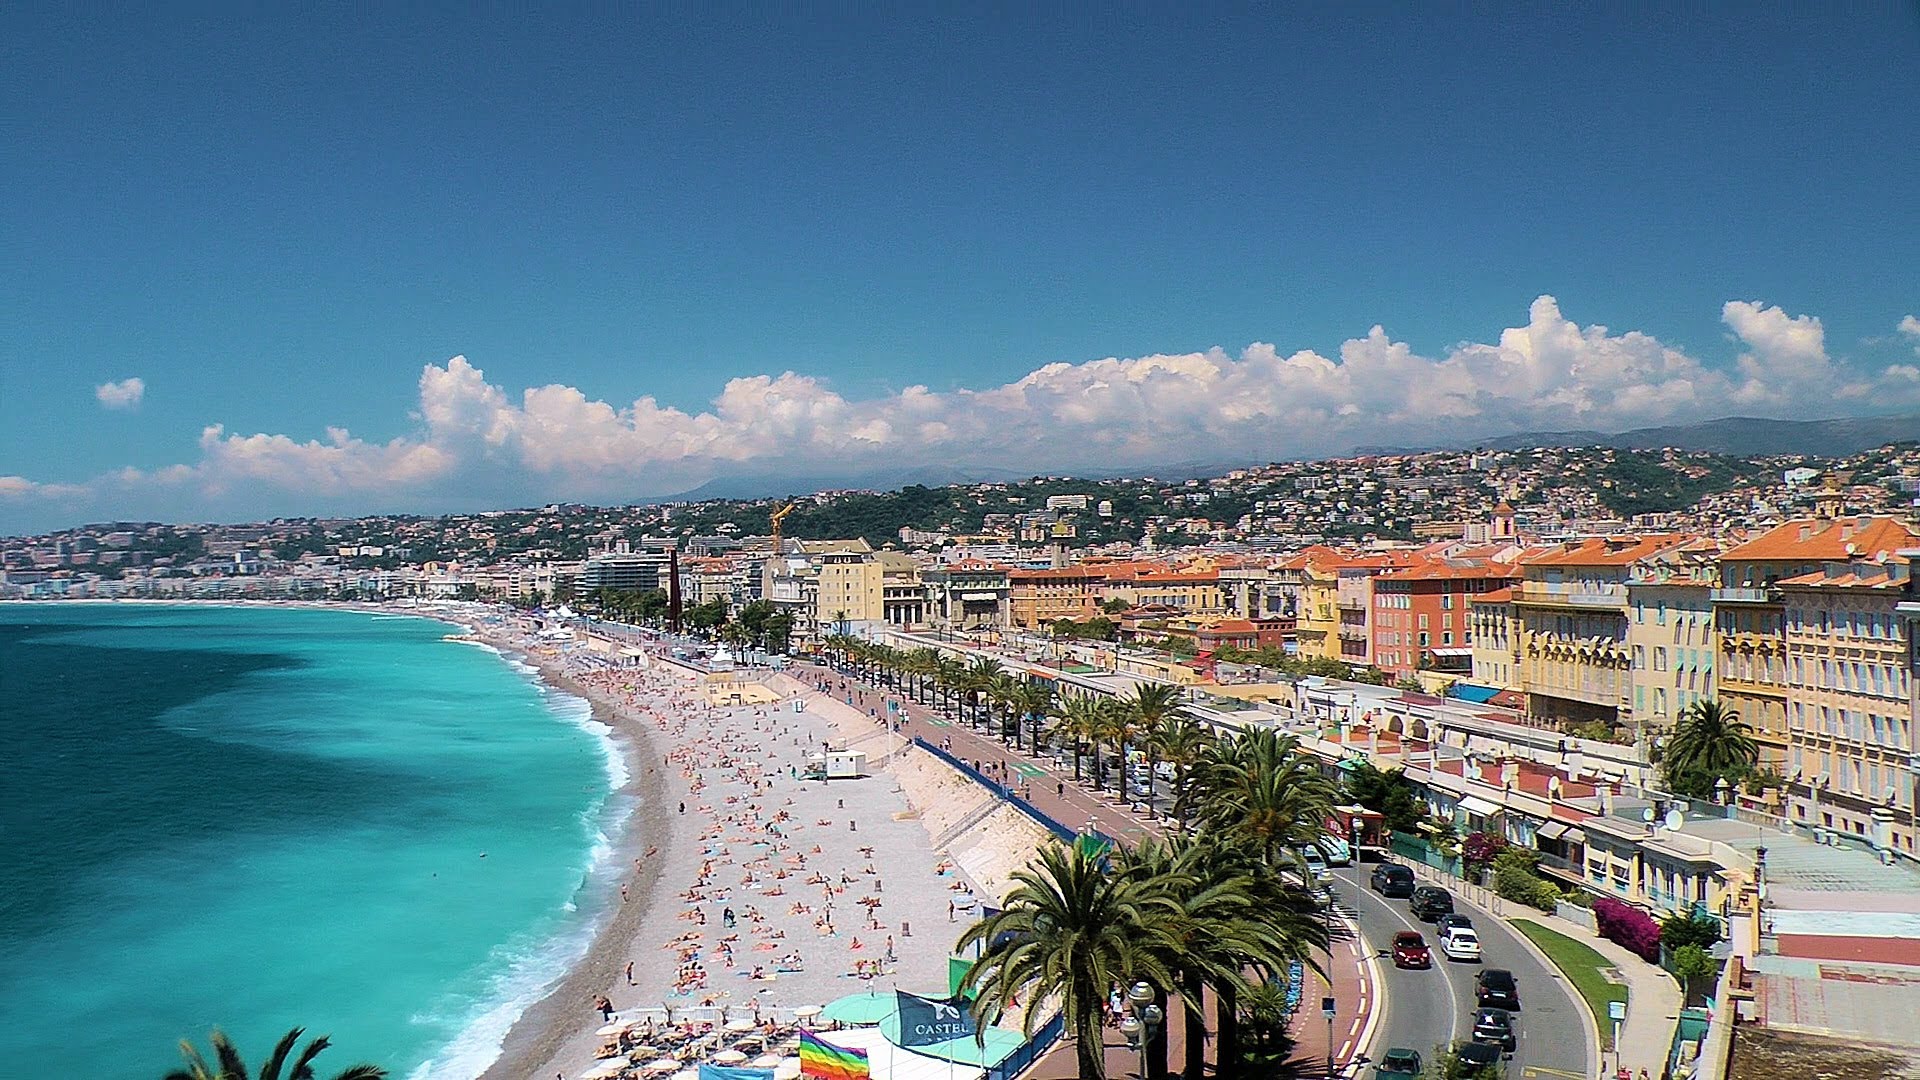 Visit Nice: TOP 15 Things to Do Must See in Nice | France Travel